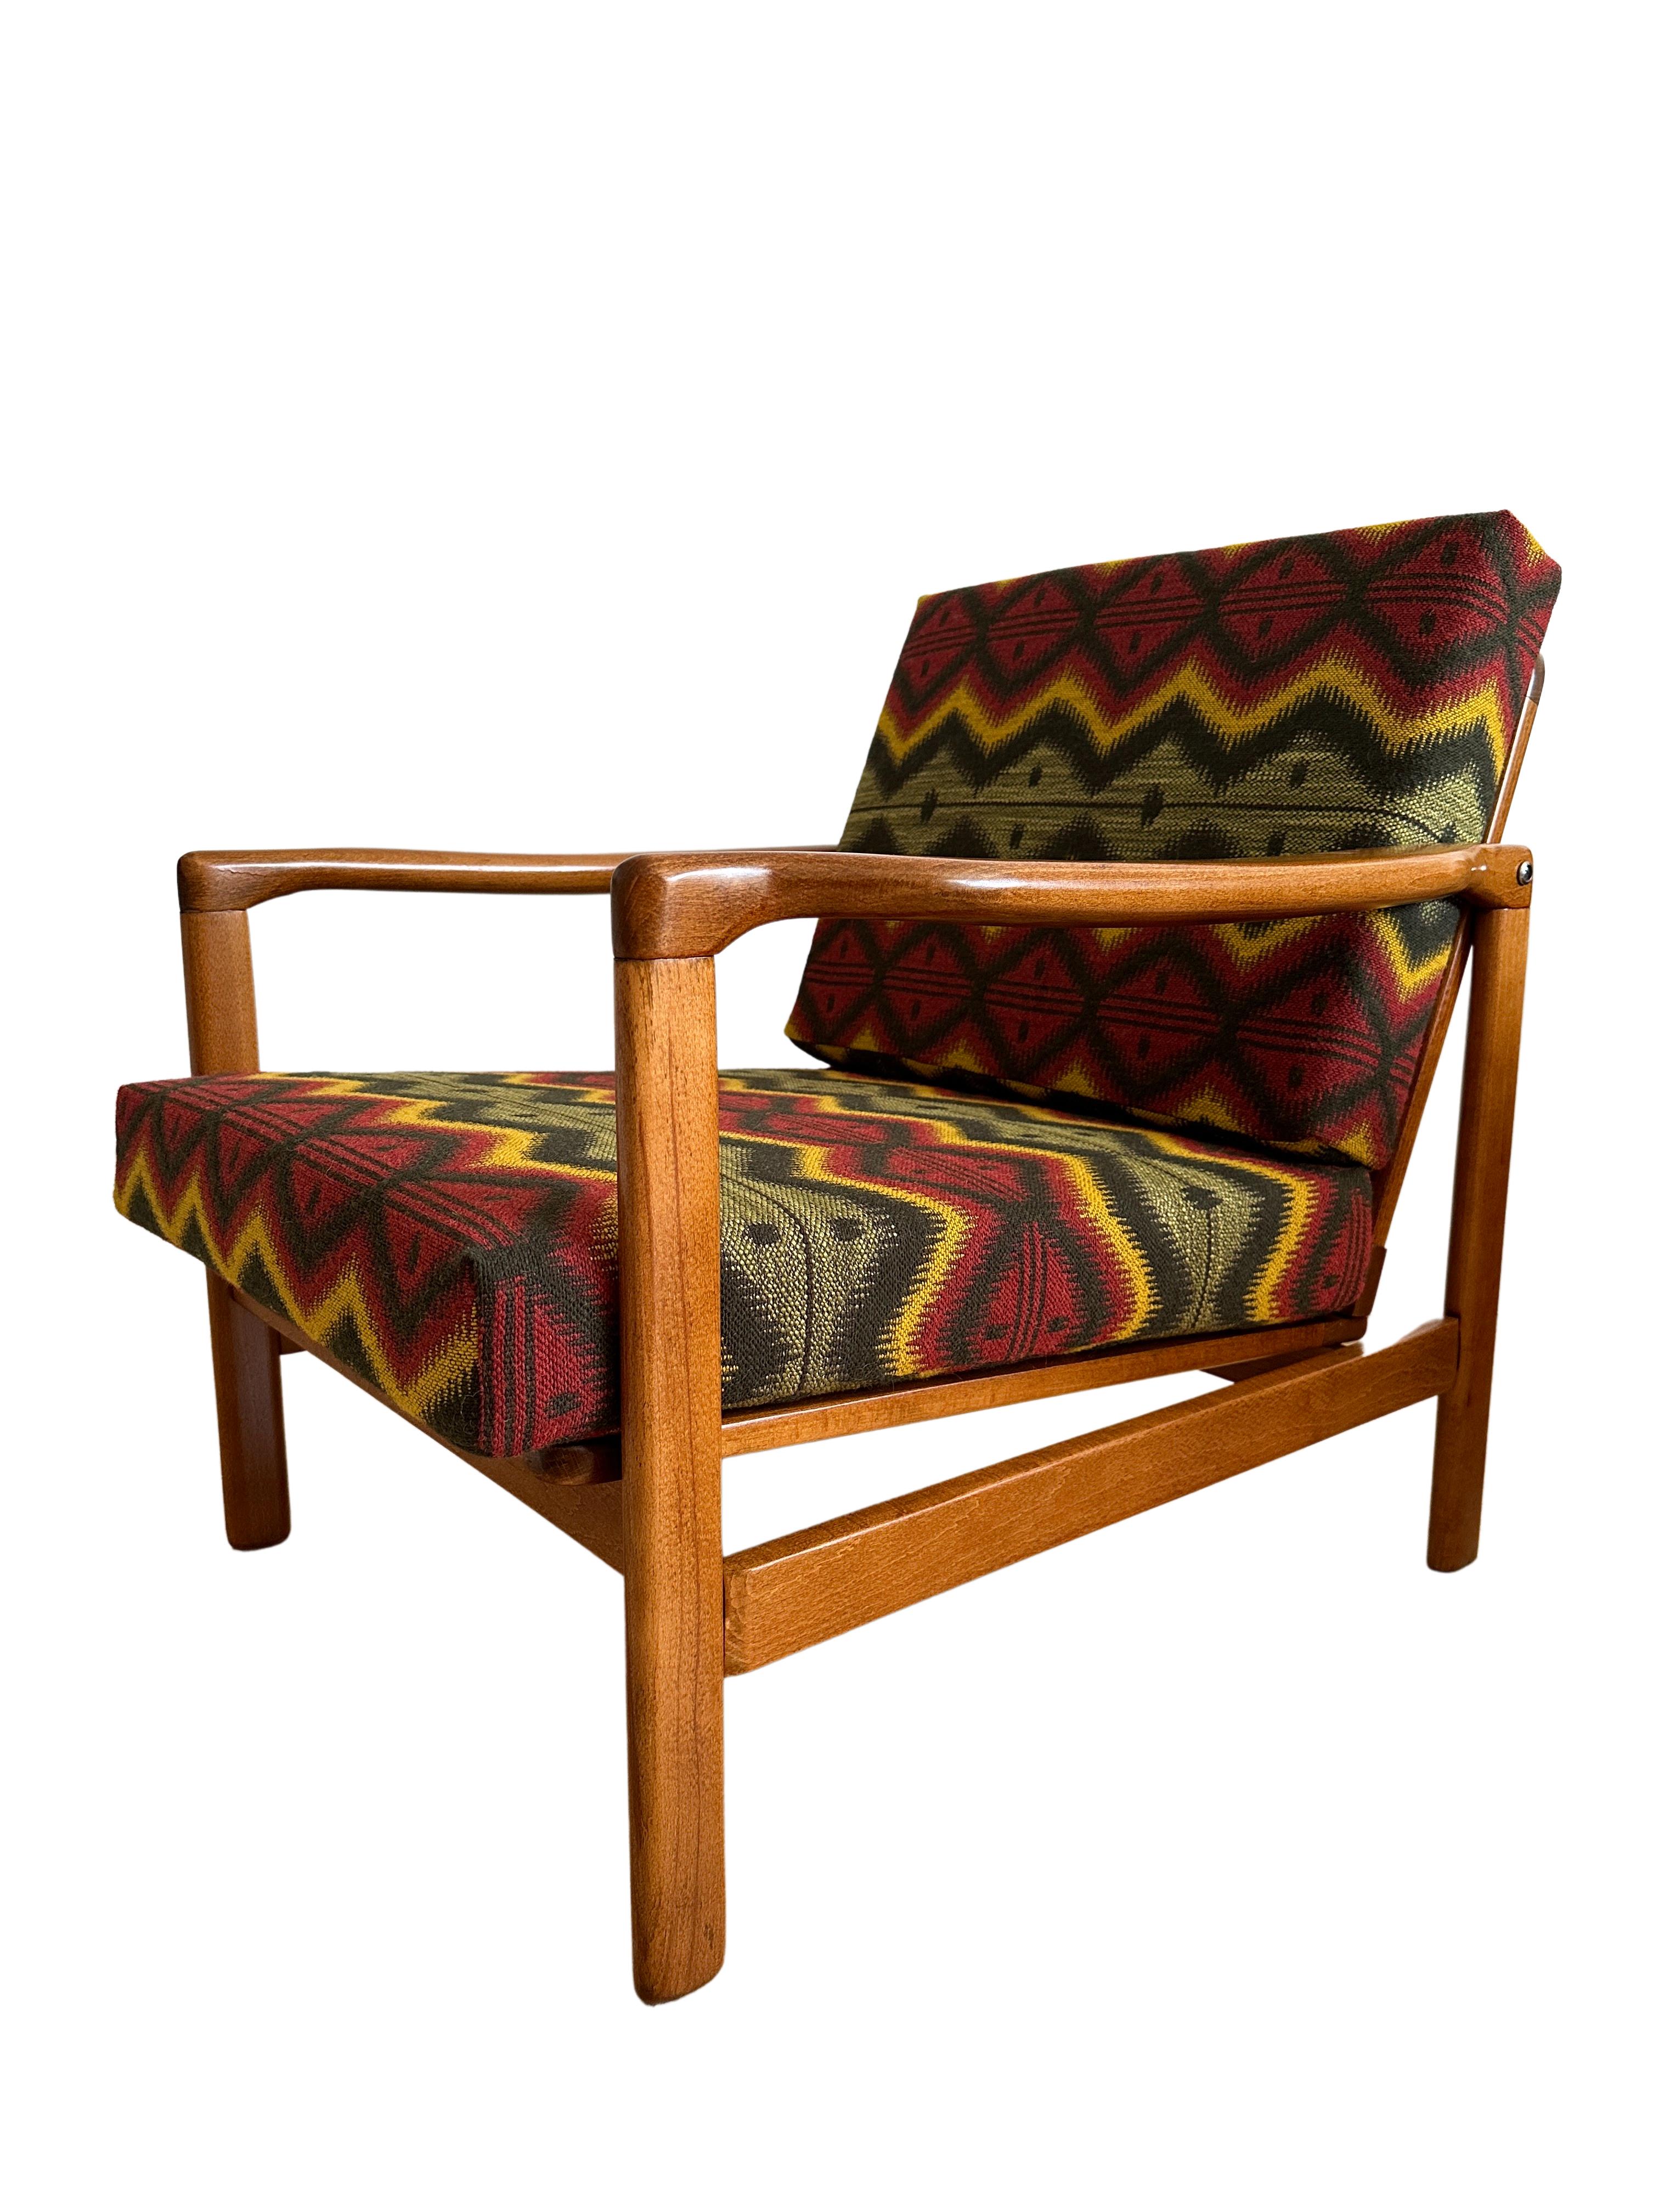 Fabric Set of Two Armchairs by Zenon Bączyk, Mind the Gap Upholstery, Europe, 1960s For Sale